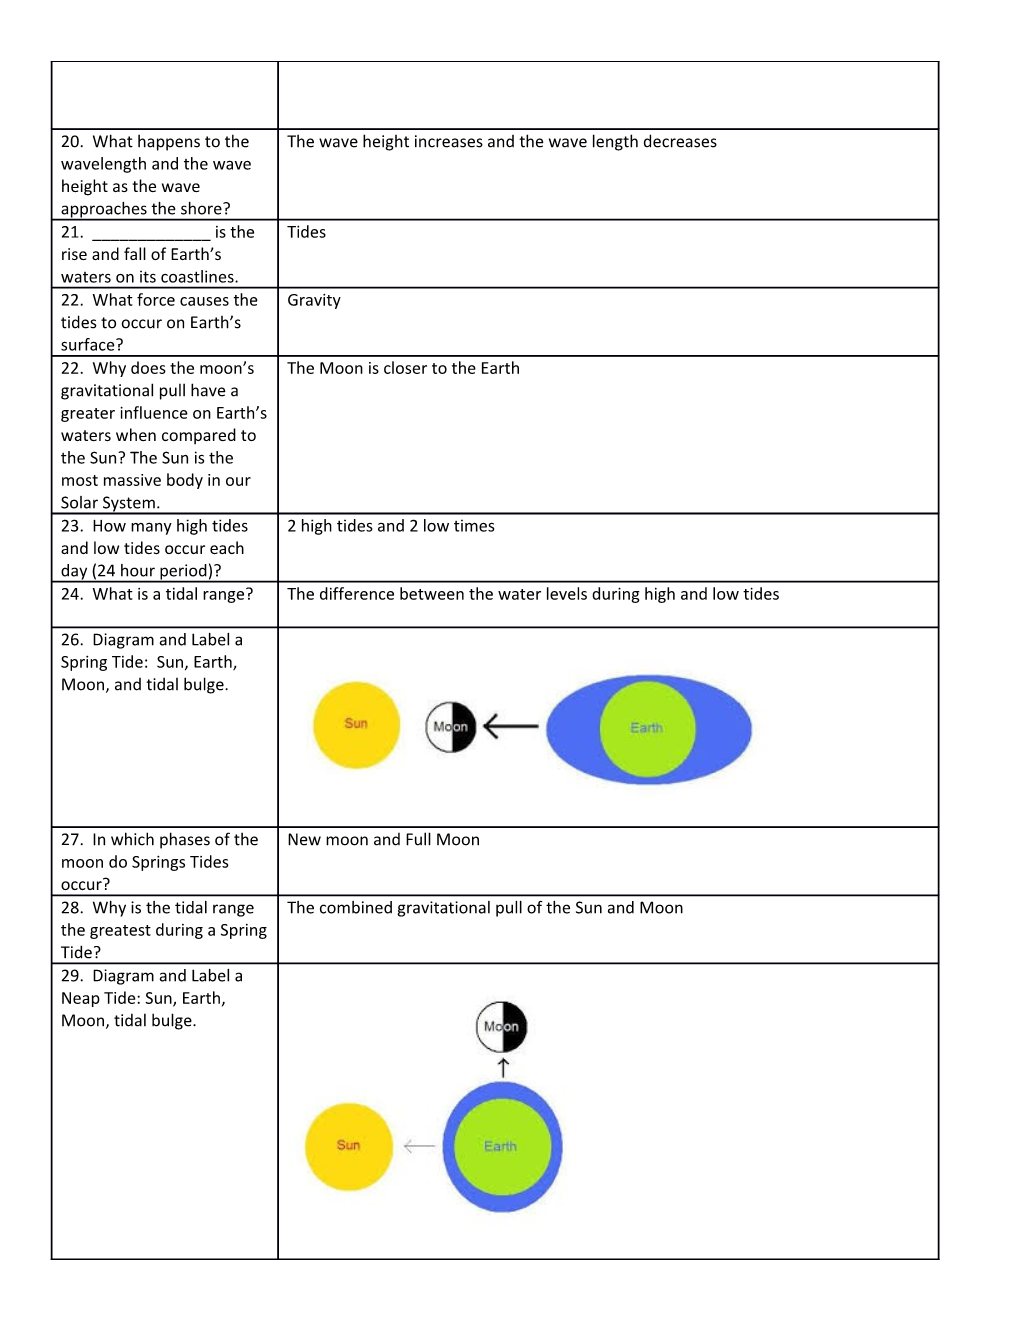 Standard S6E3 D. Explain the Causes of Currents, Waves, and Tide (Study Guide)